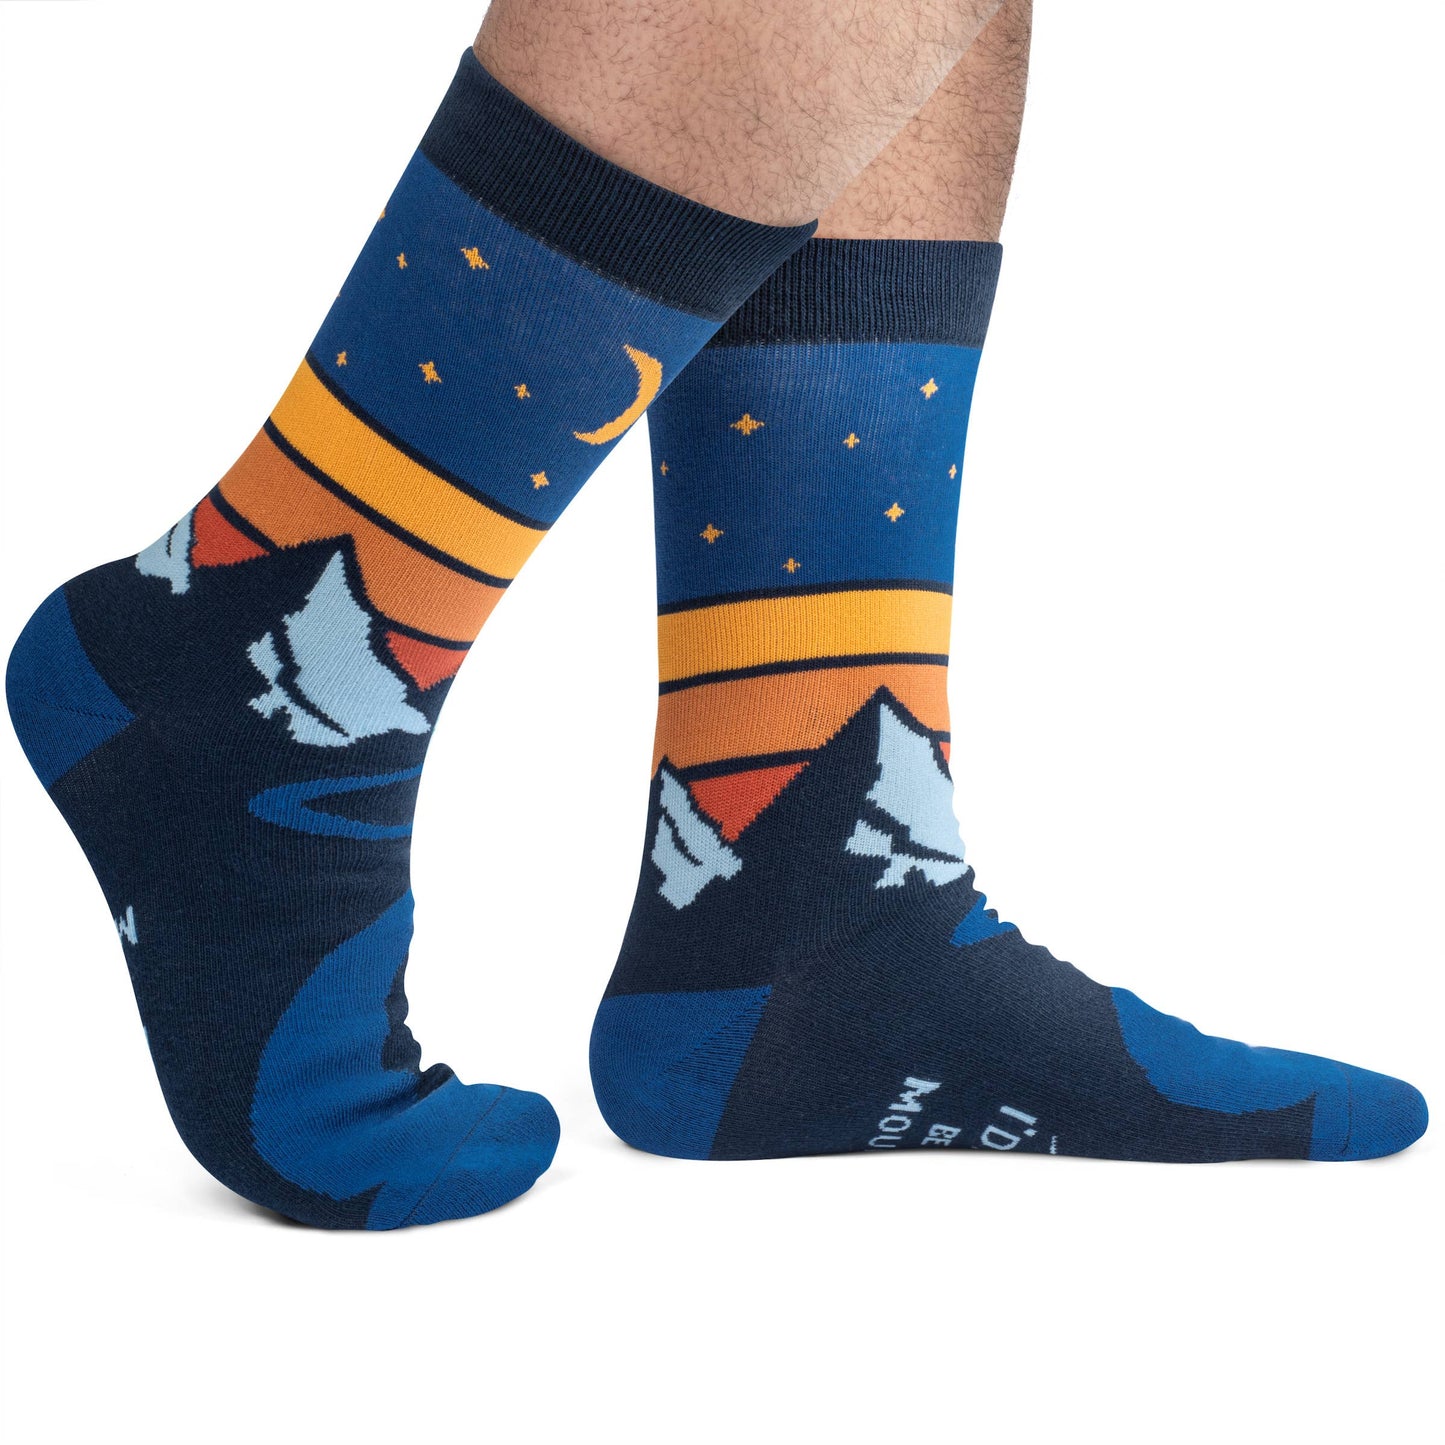 Lavley - I'd Rather Be In The Mountains Socks